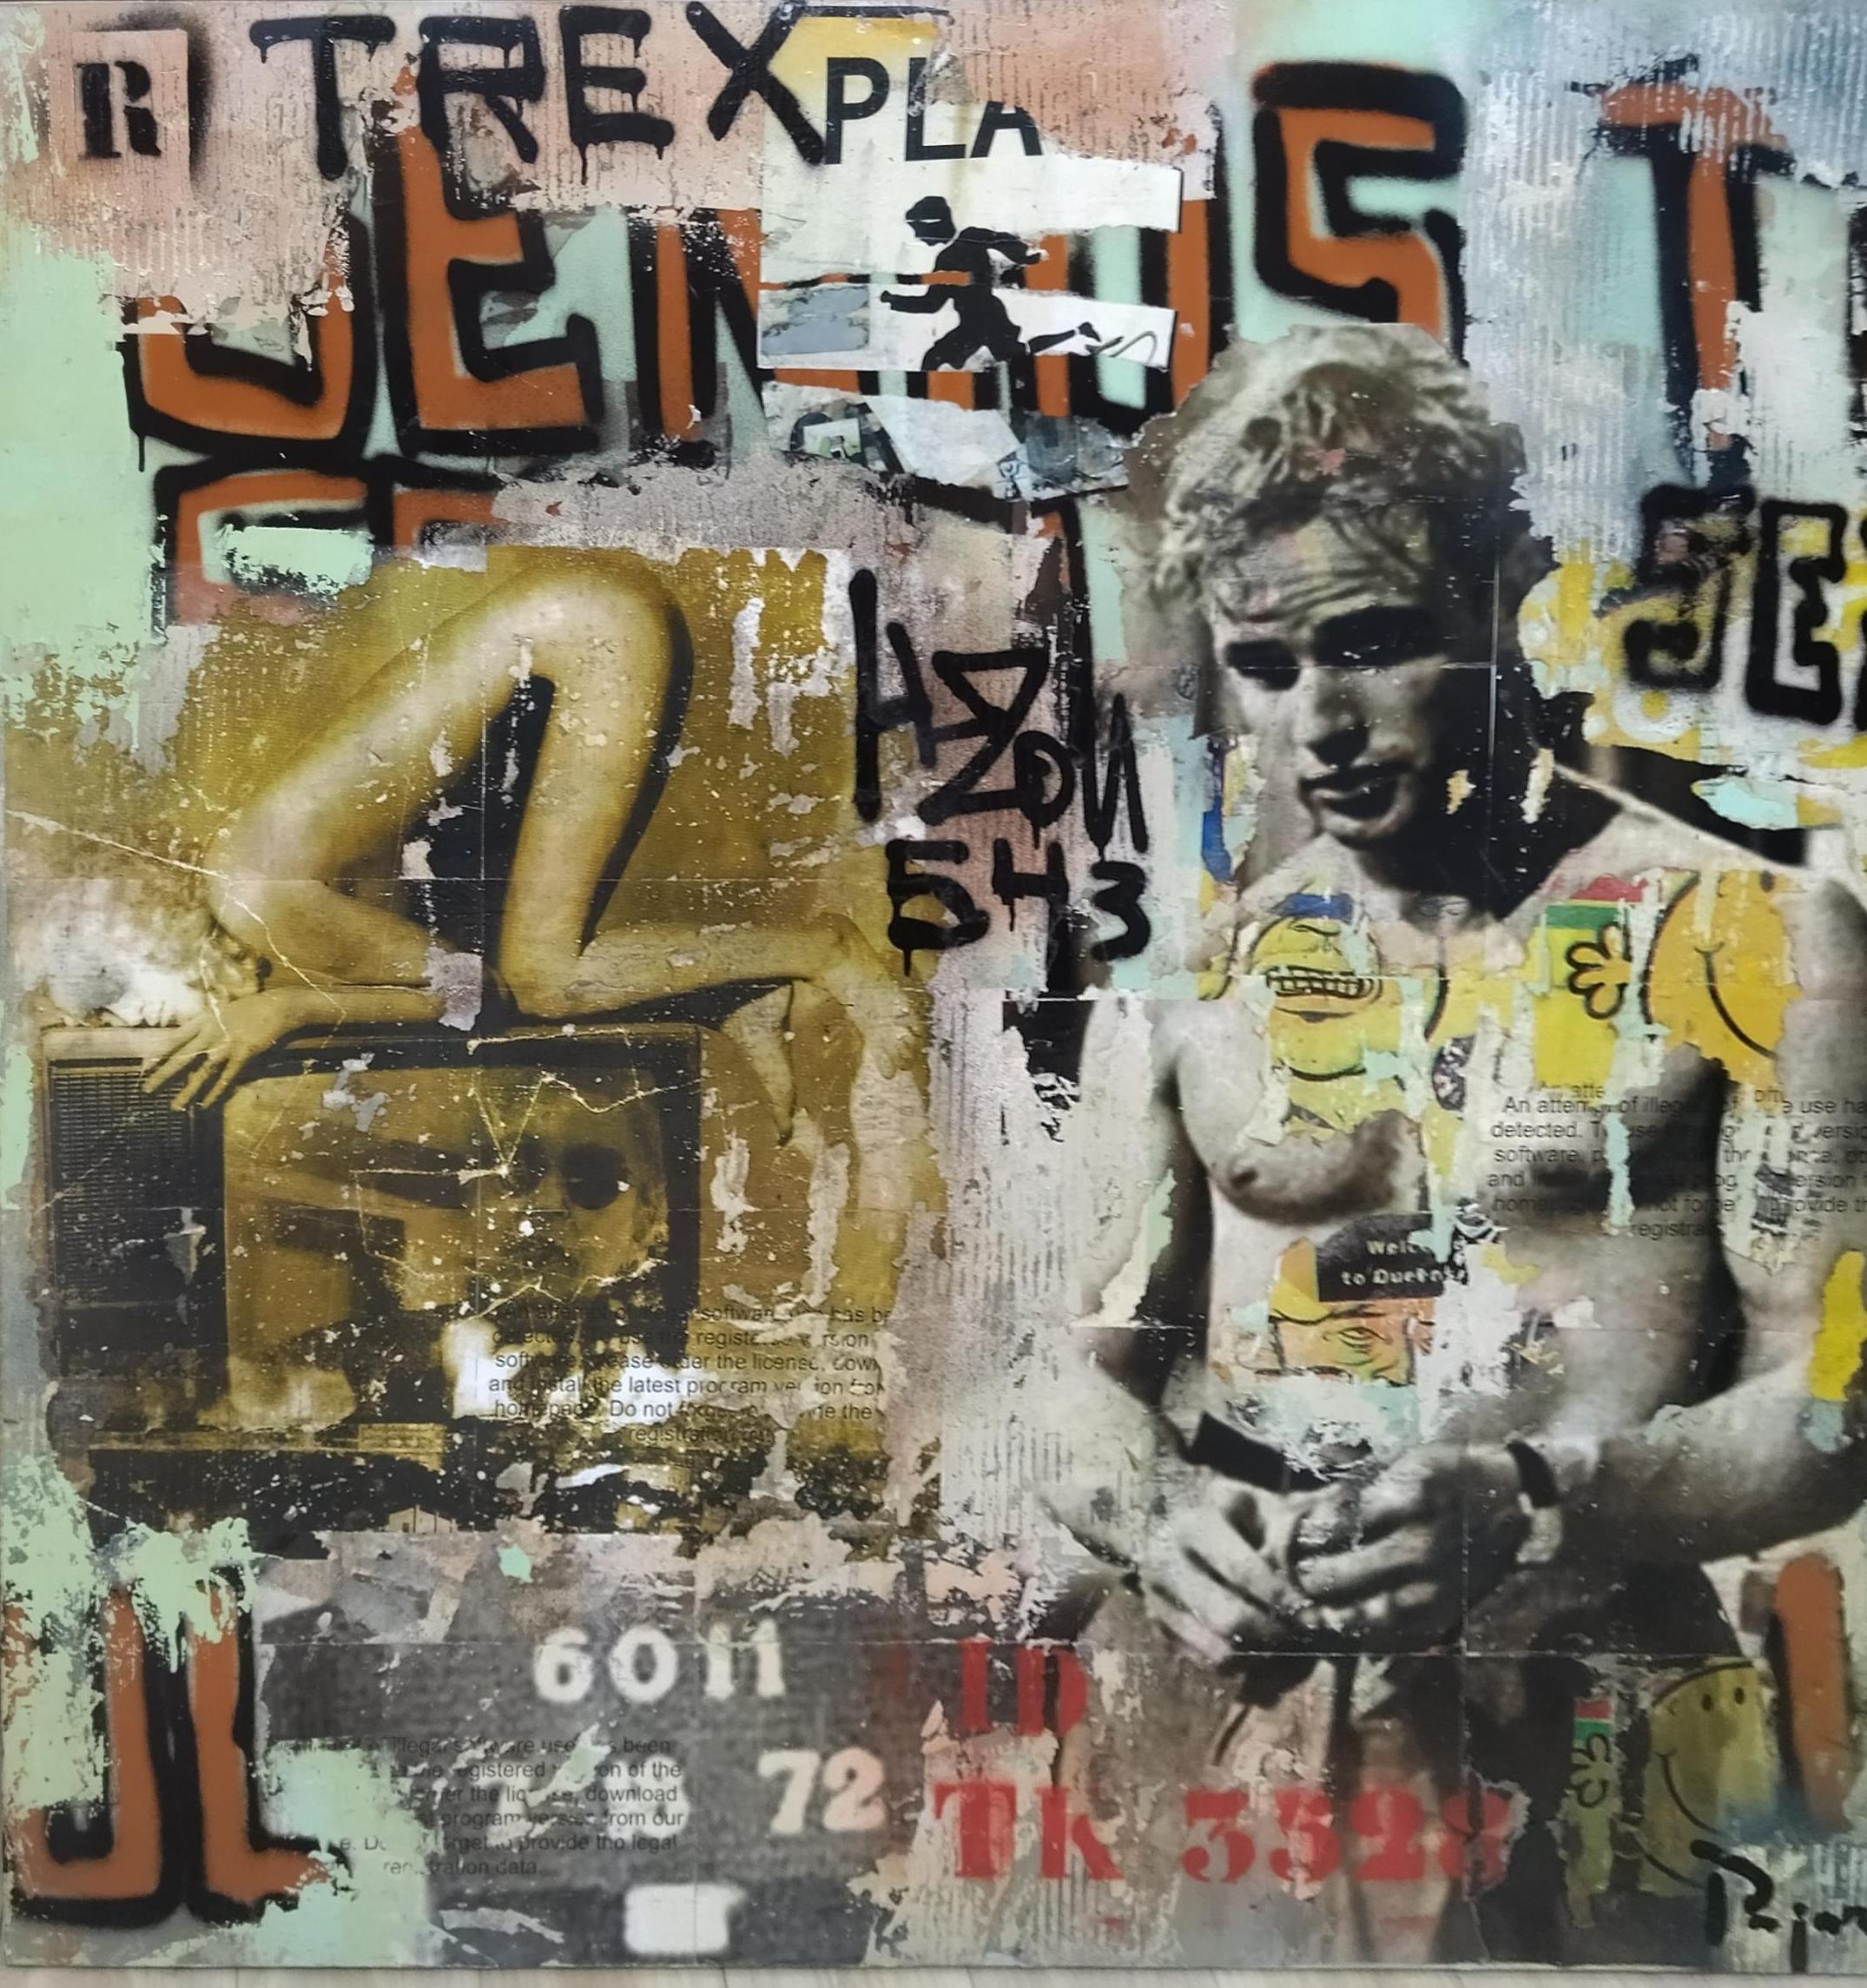 Original and unique artist PAJARES work.
Done in mixed media on canvas and collage.
PAJARES, Juan Manuel (Lleida 1957 )
Pajares was introduced to the impact of large-scale canvas painting using acrylics, collages and paints. Driven by insatiable